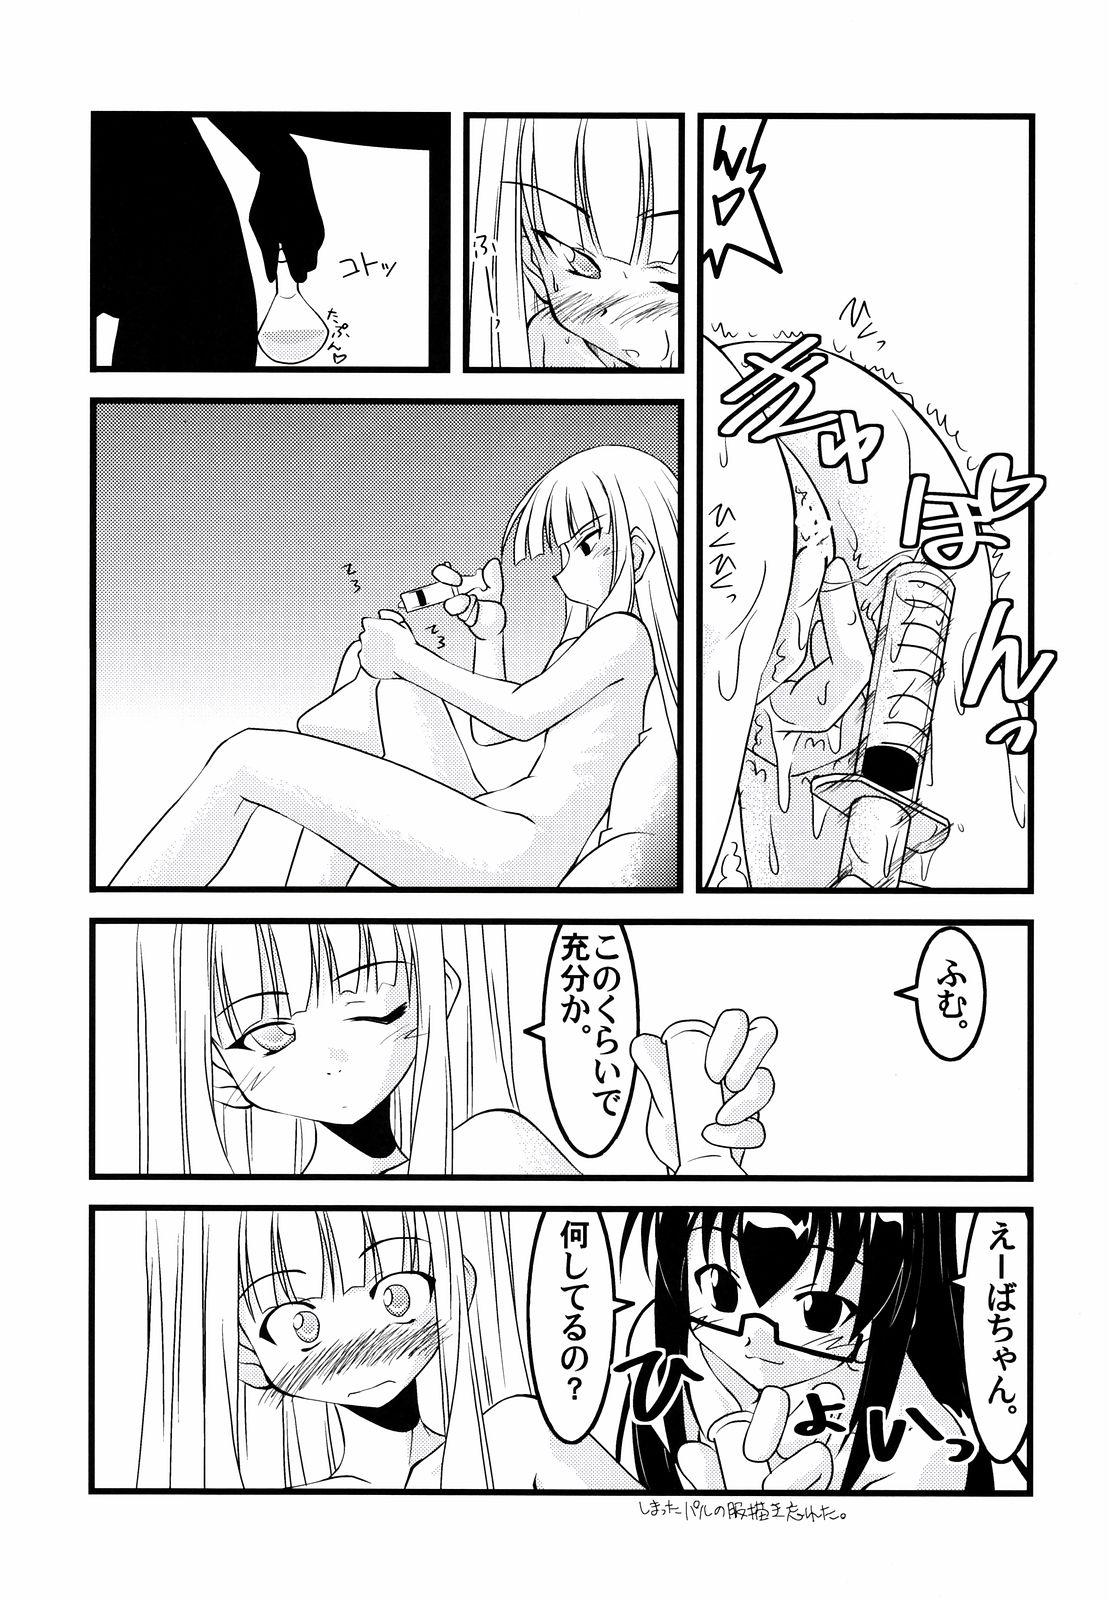 Anal Sex Lovelys in the School with Dream 5 - Mahou sensei negima Hot Women Fucking - Page 4